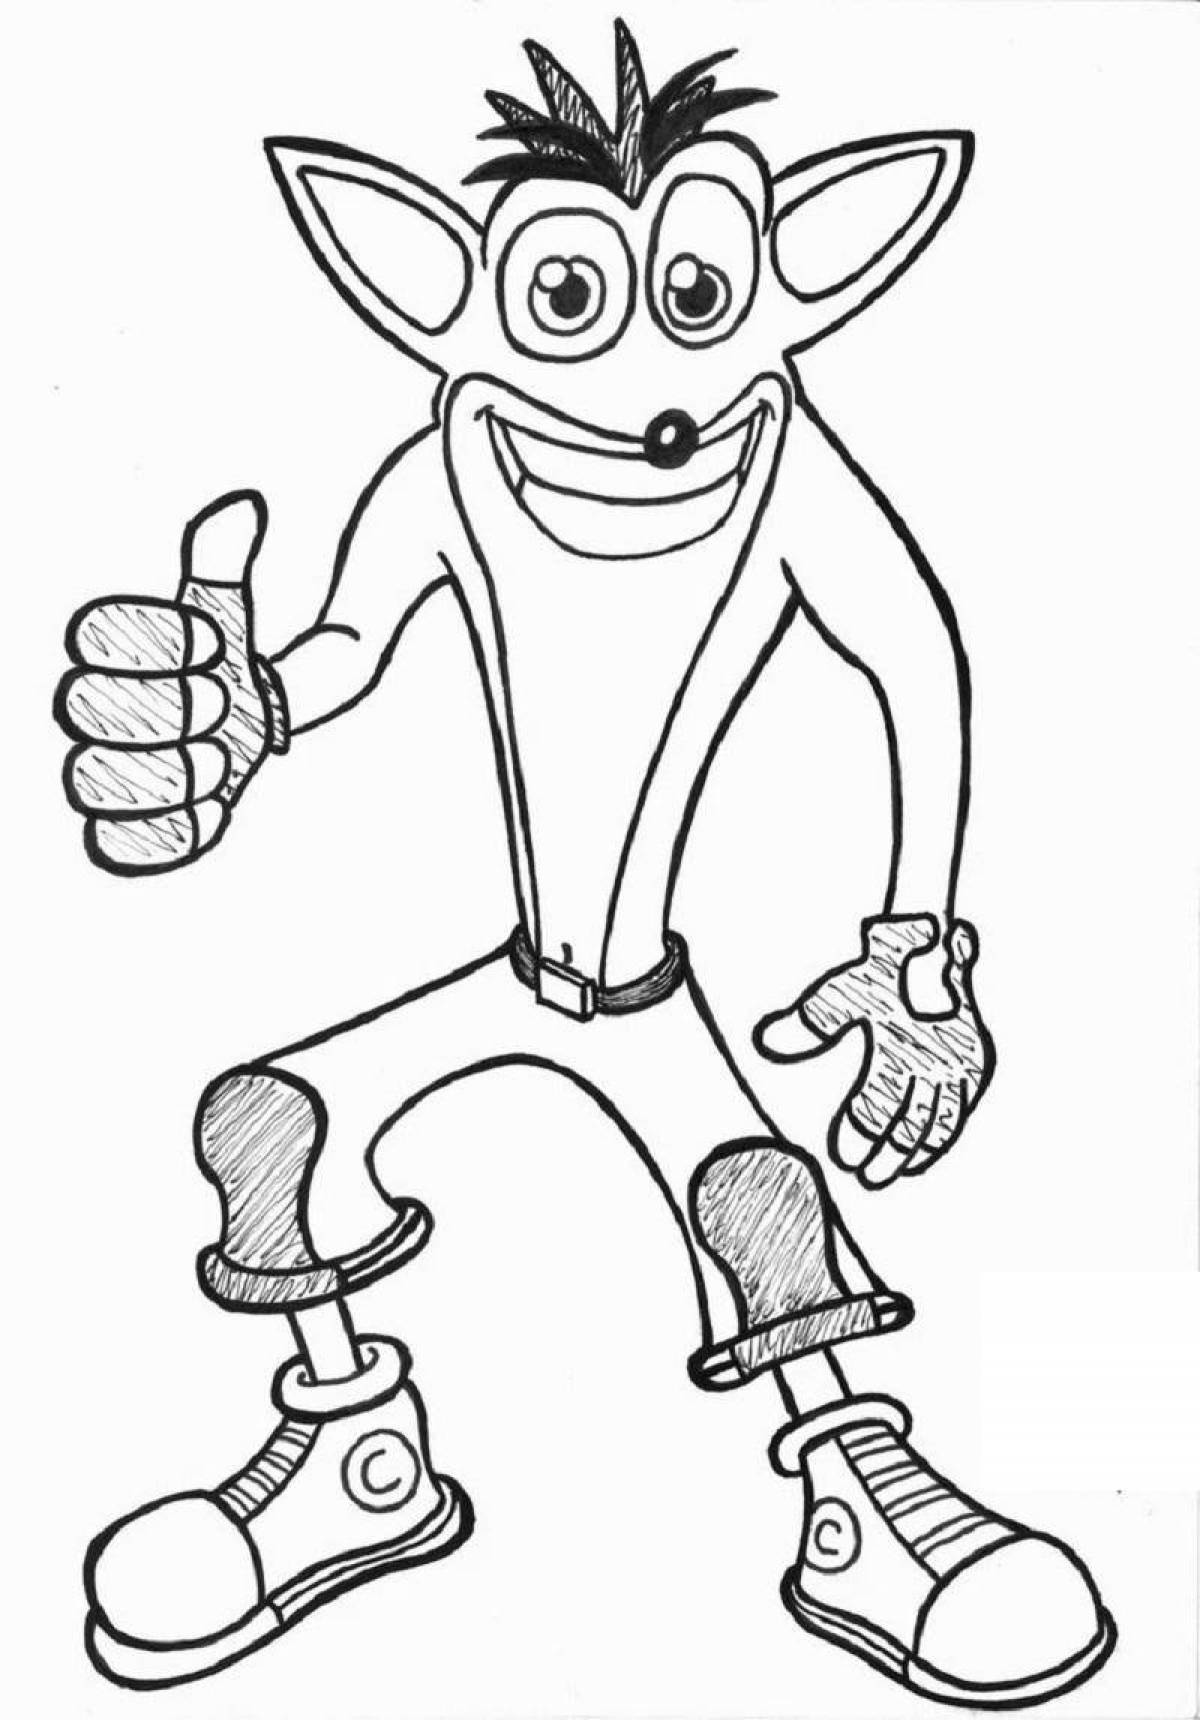 Bright coloring page crush